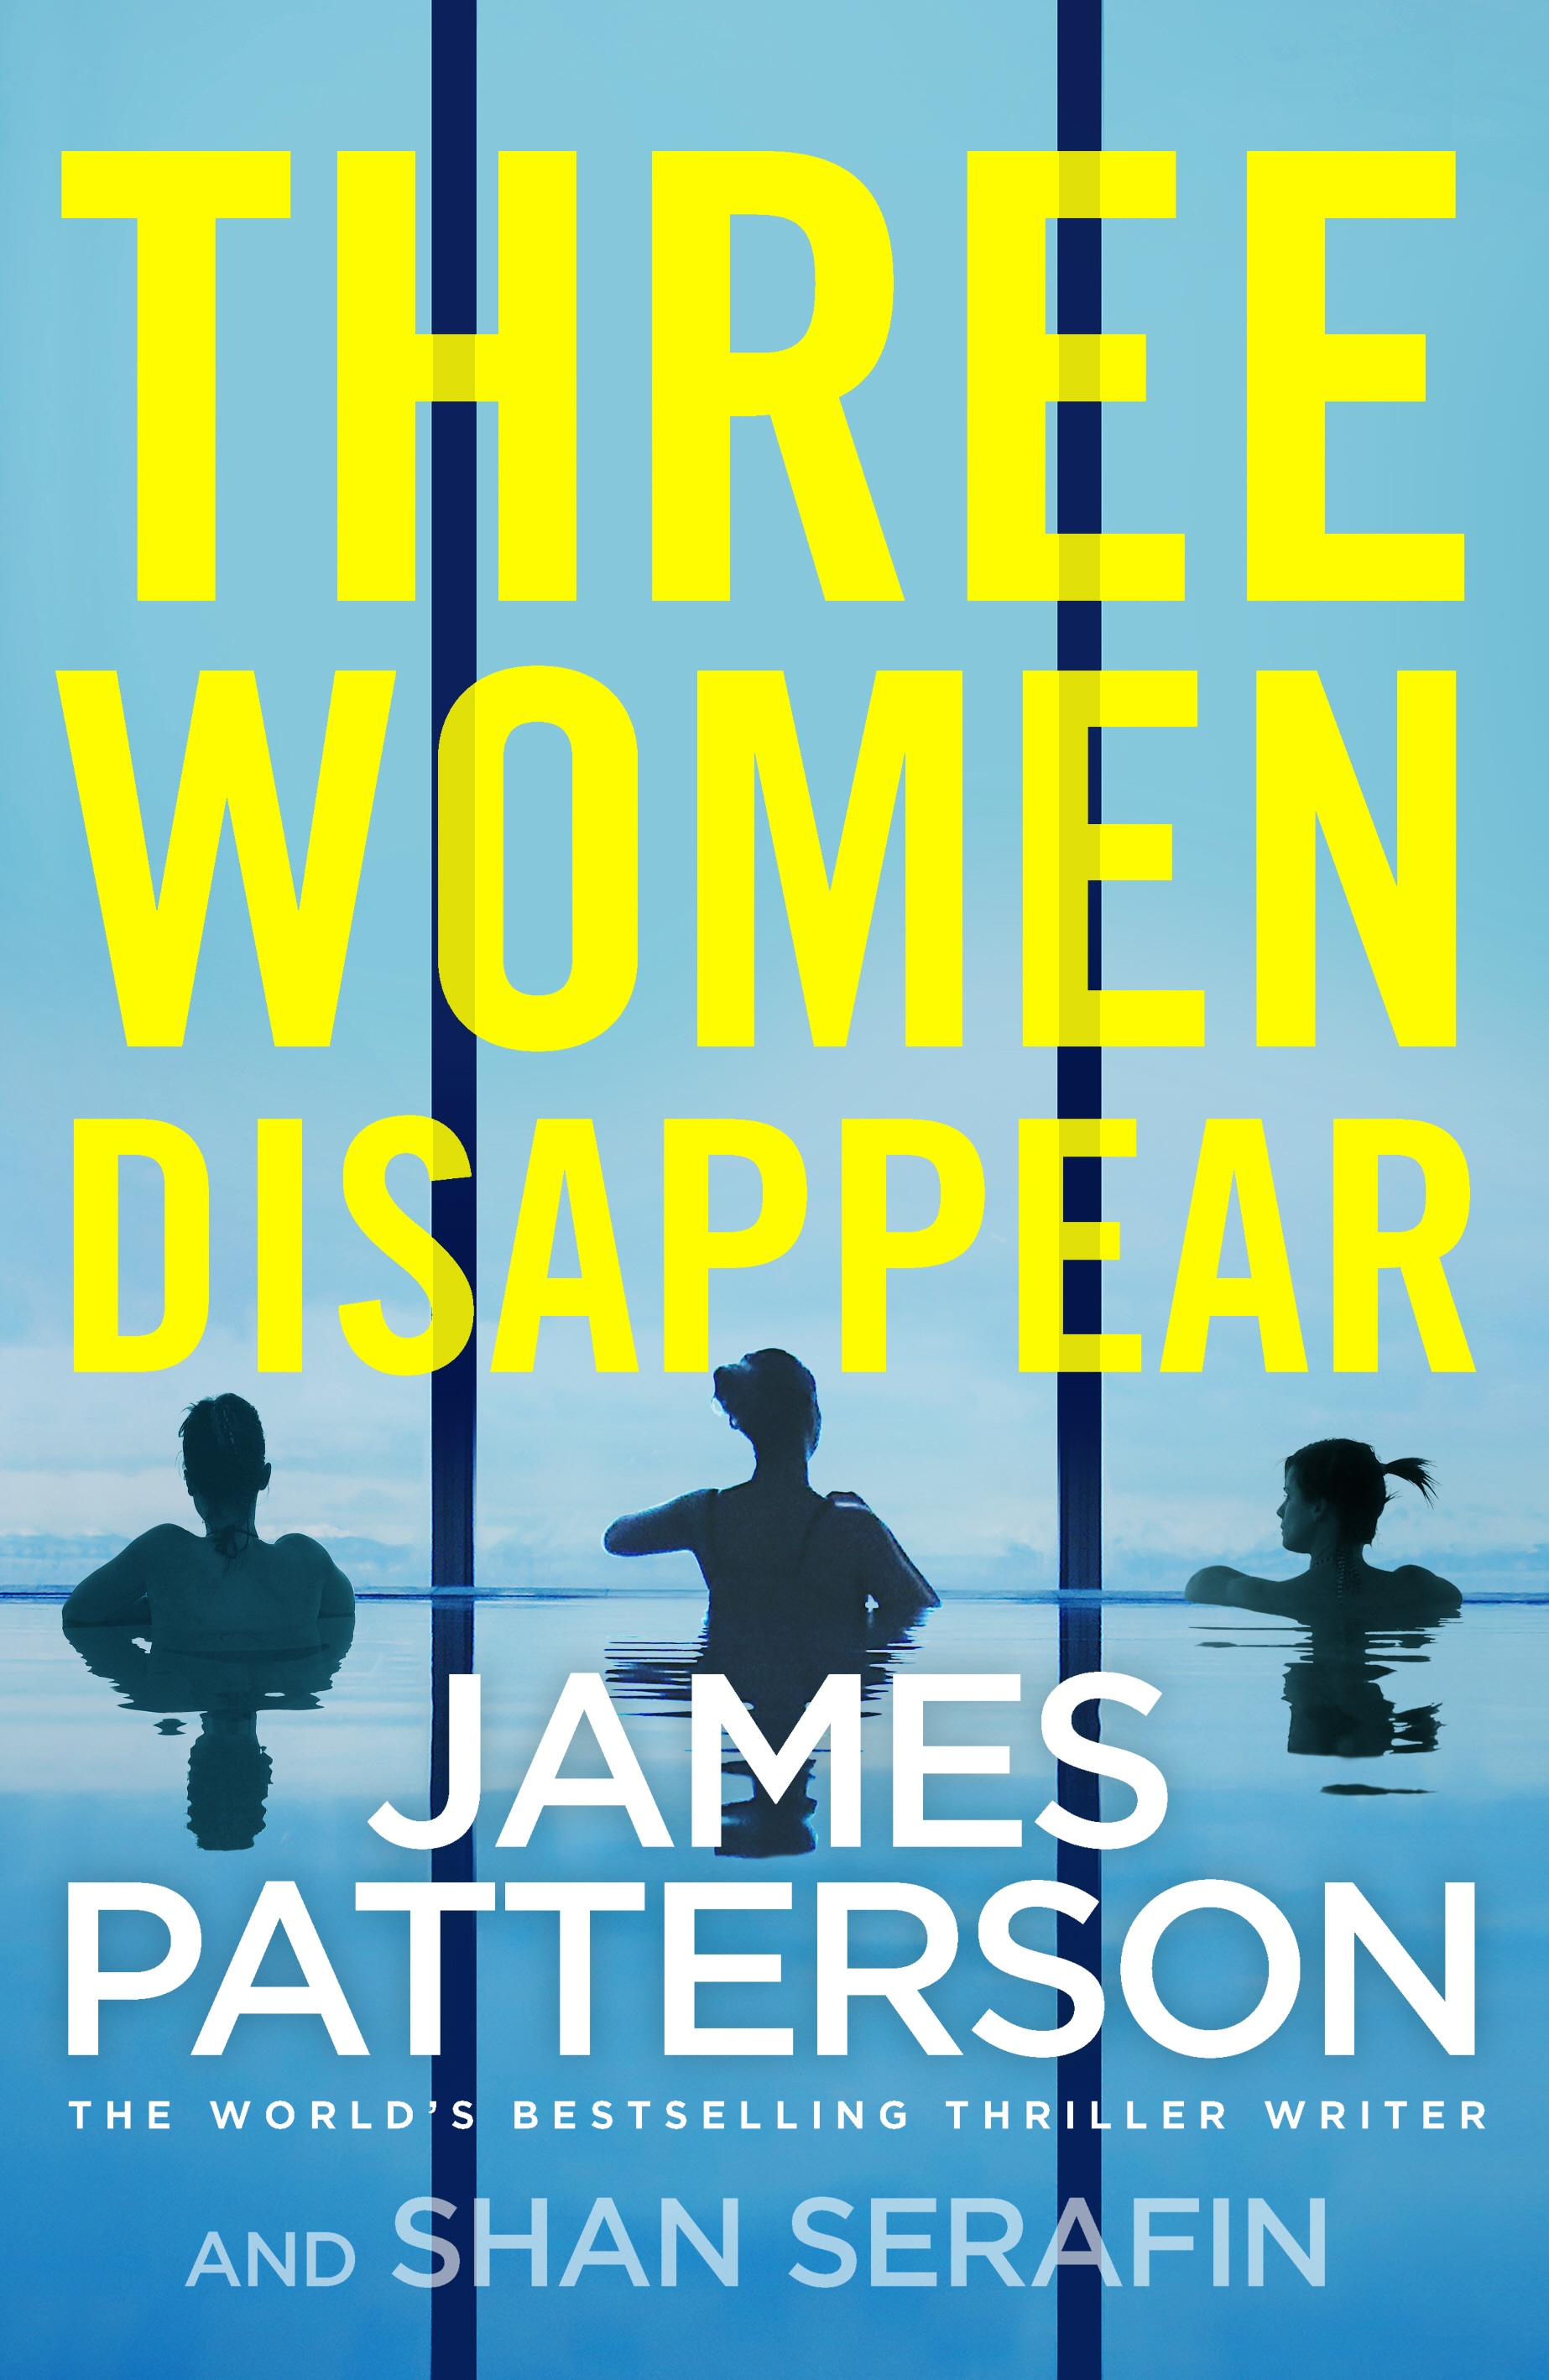 Book “Three Women Disappear” by James Patterson — October 29, 2020